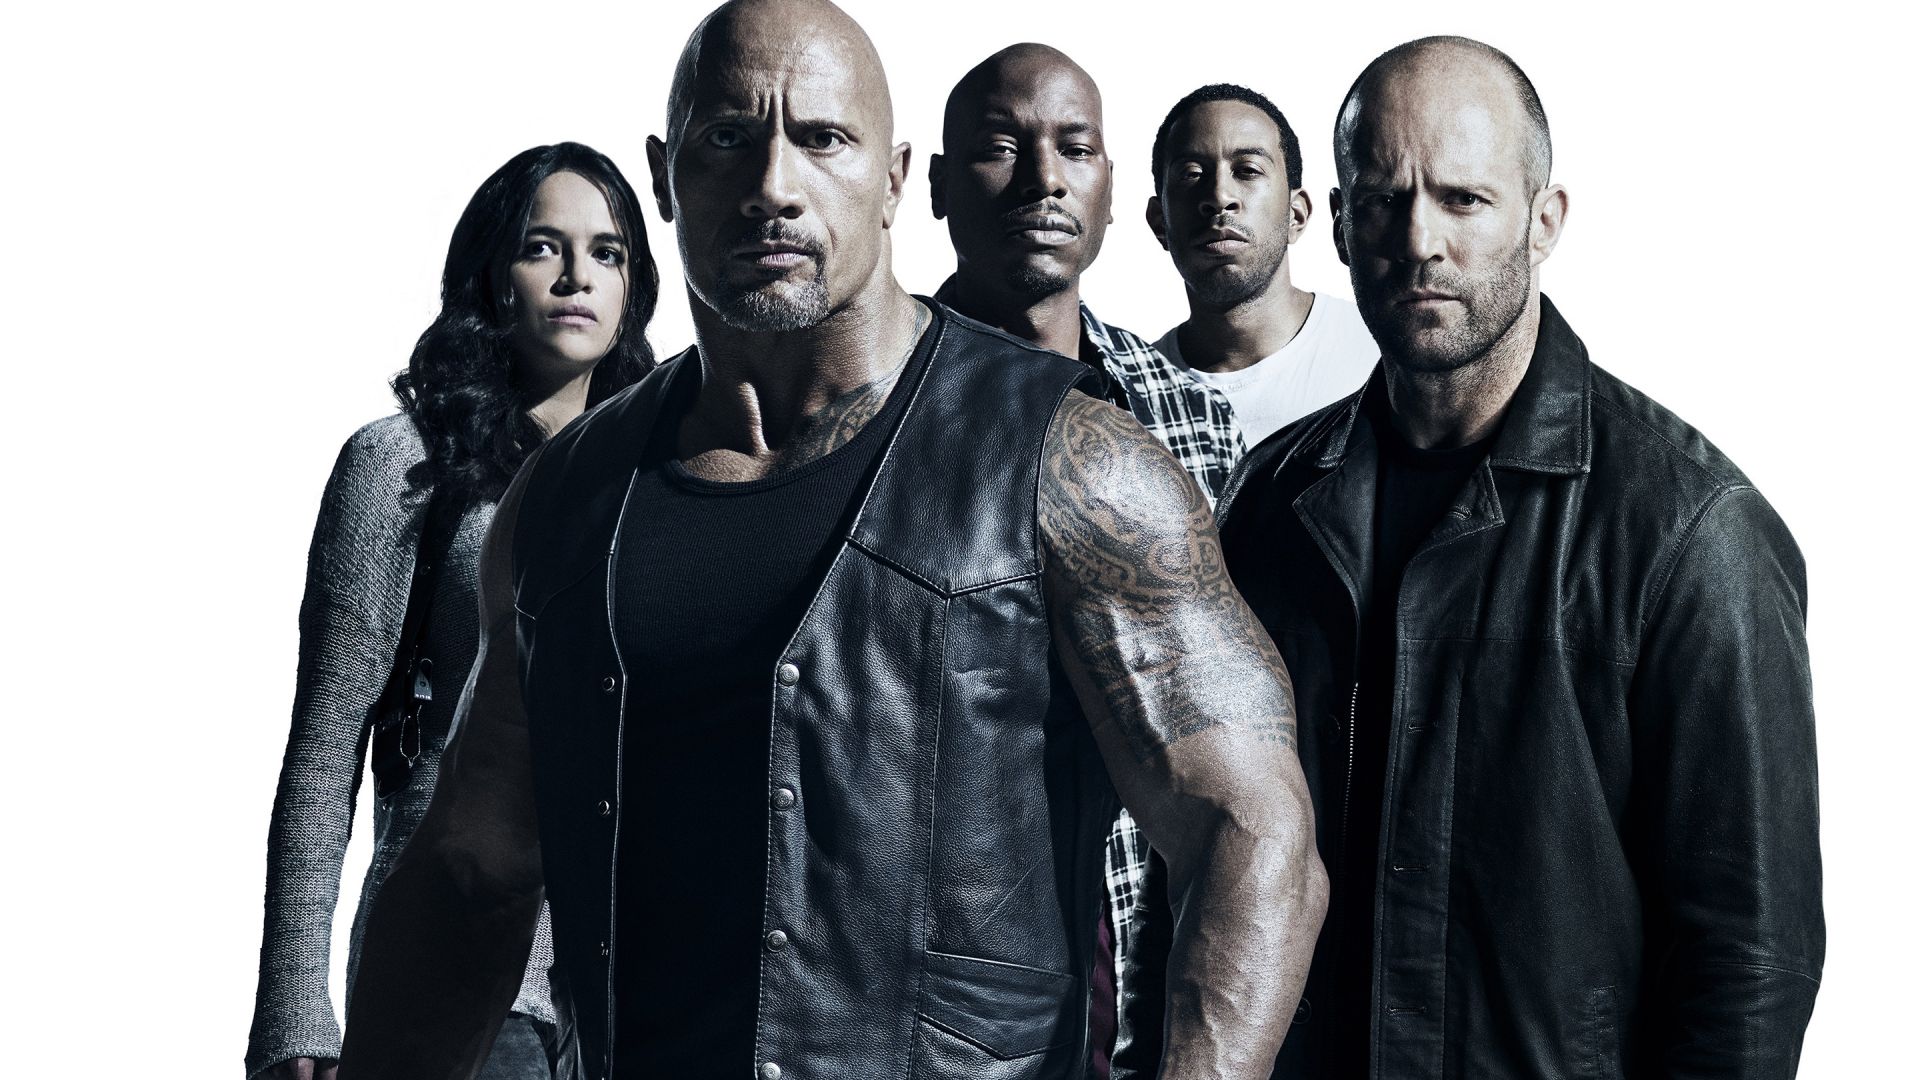 Wallpaper 2017 movie, The Fate of the Furious, cast